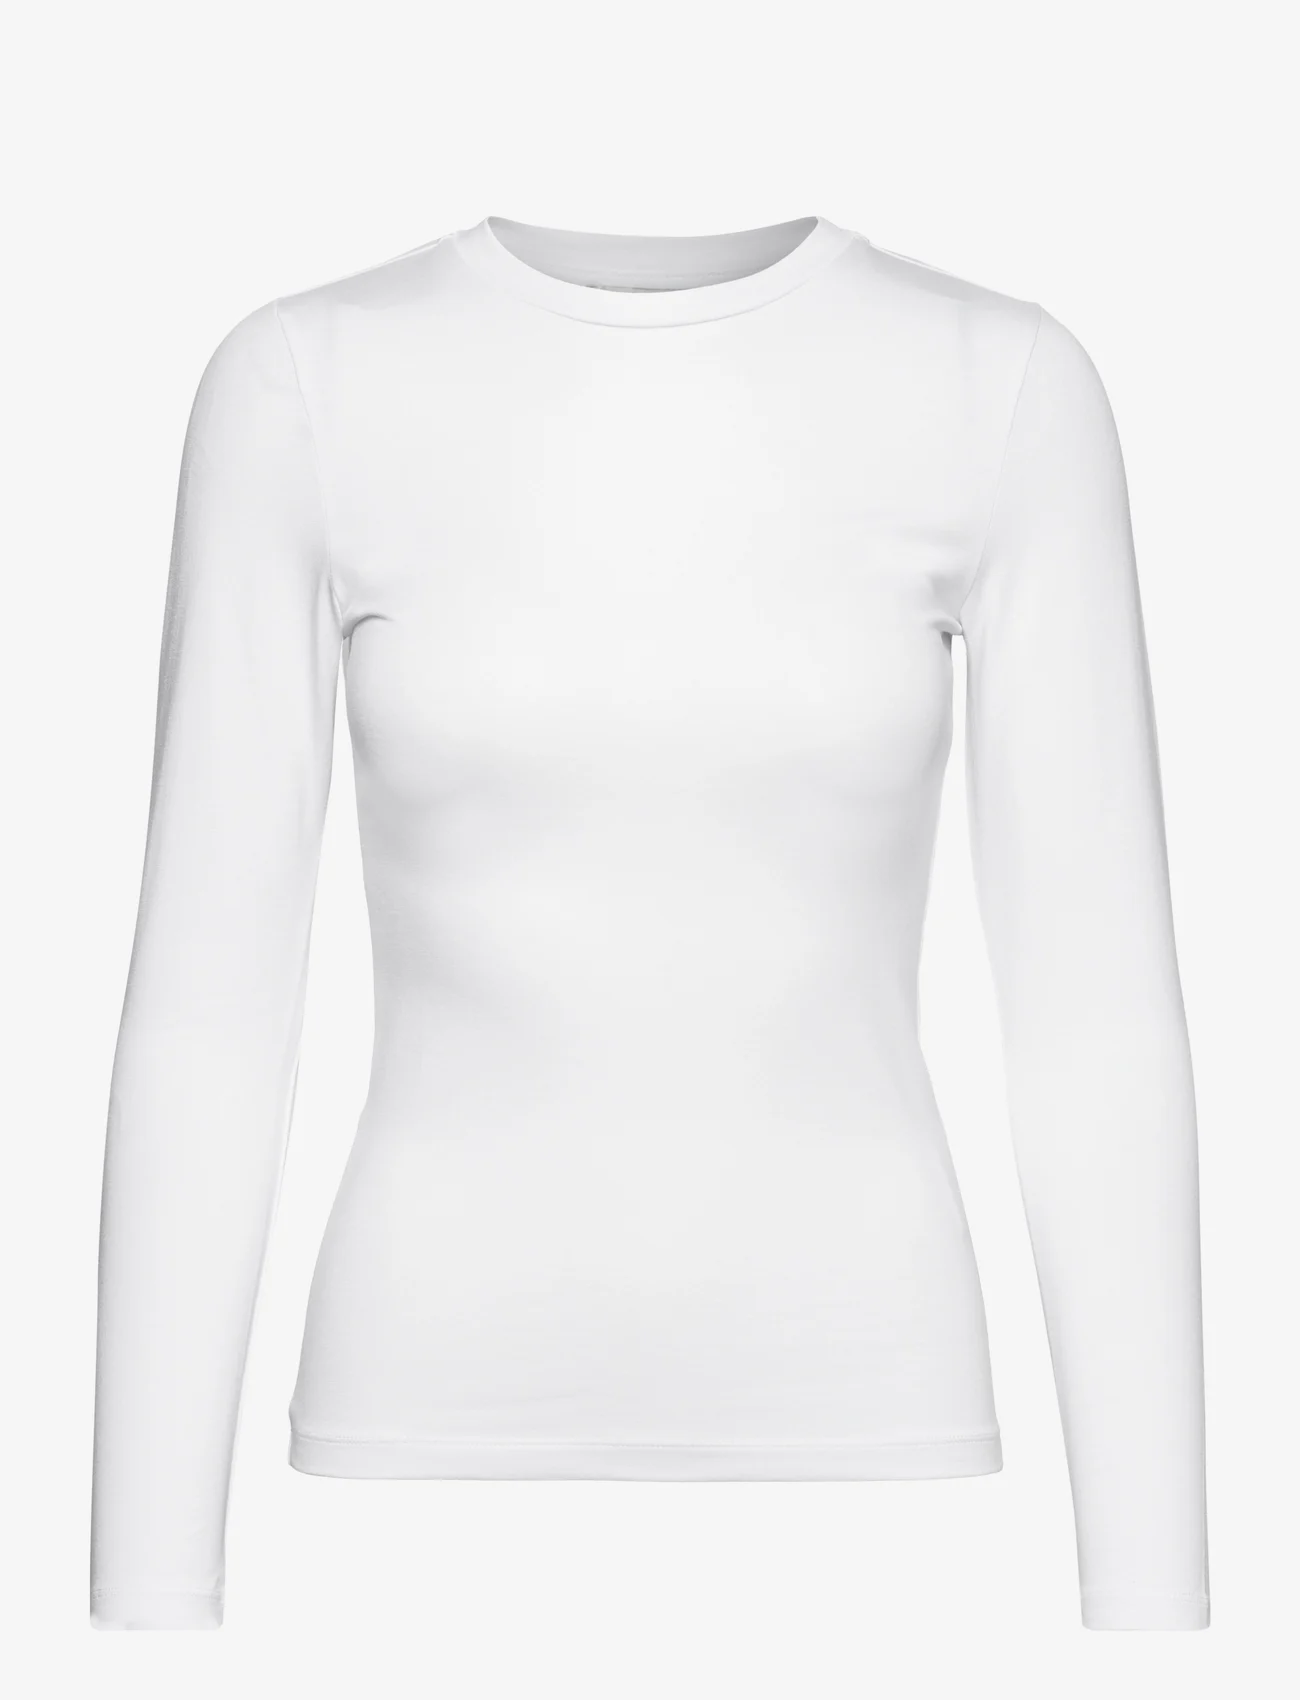 A-View - Stabil top l/s - lowest prices - white - 0